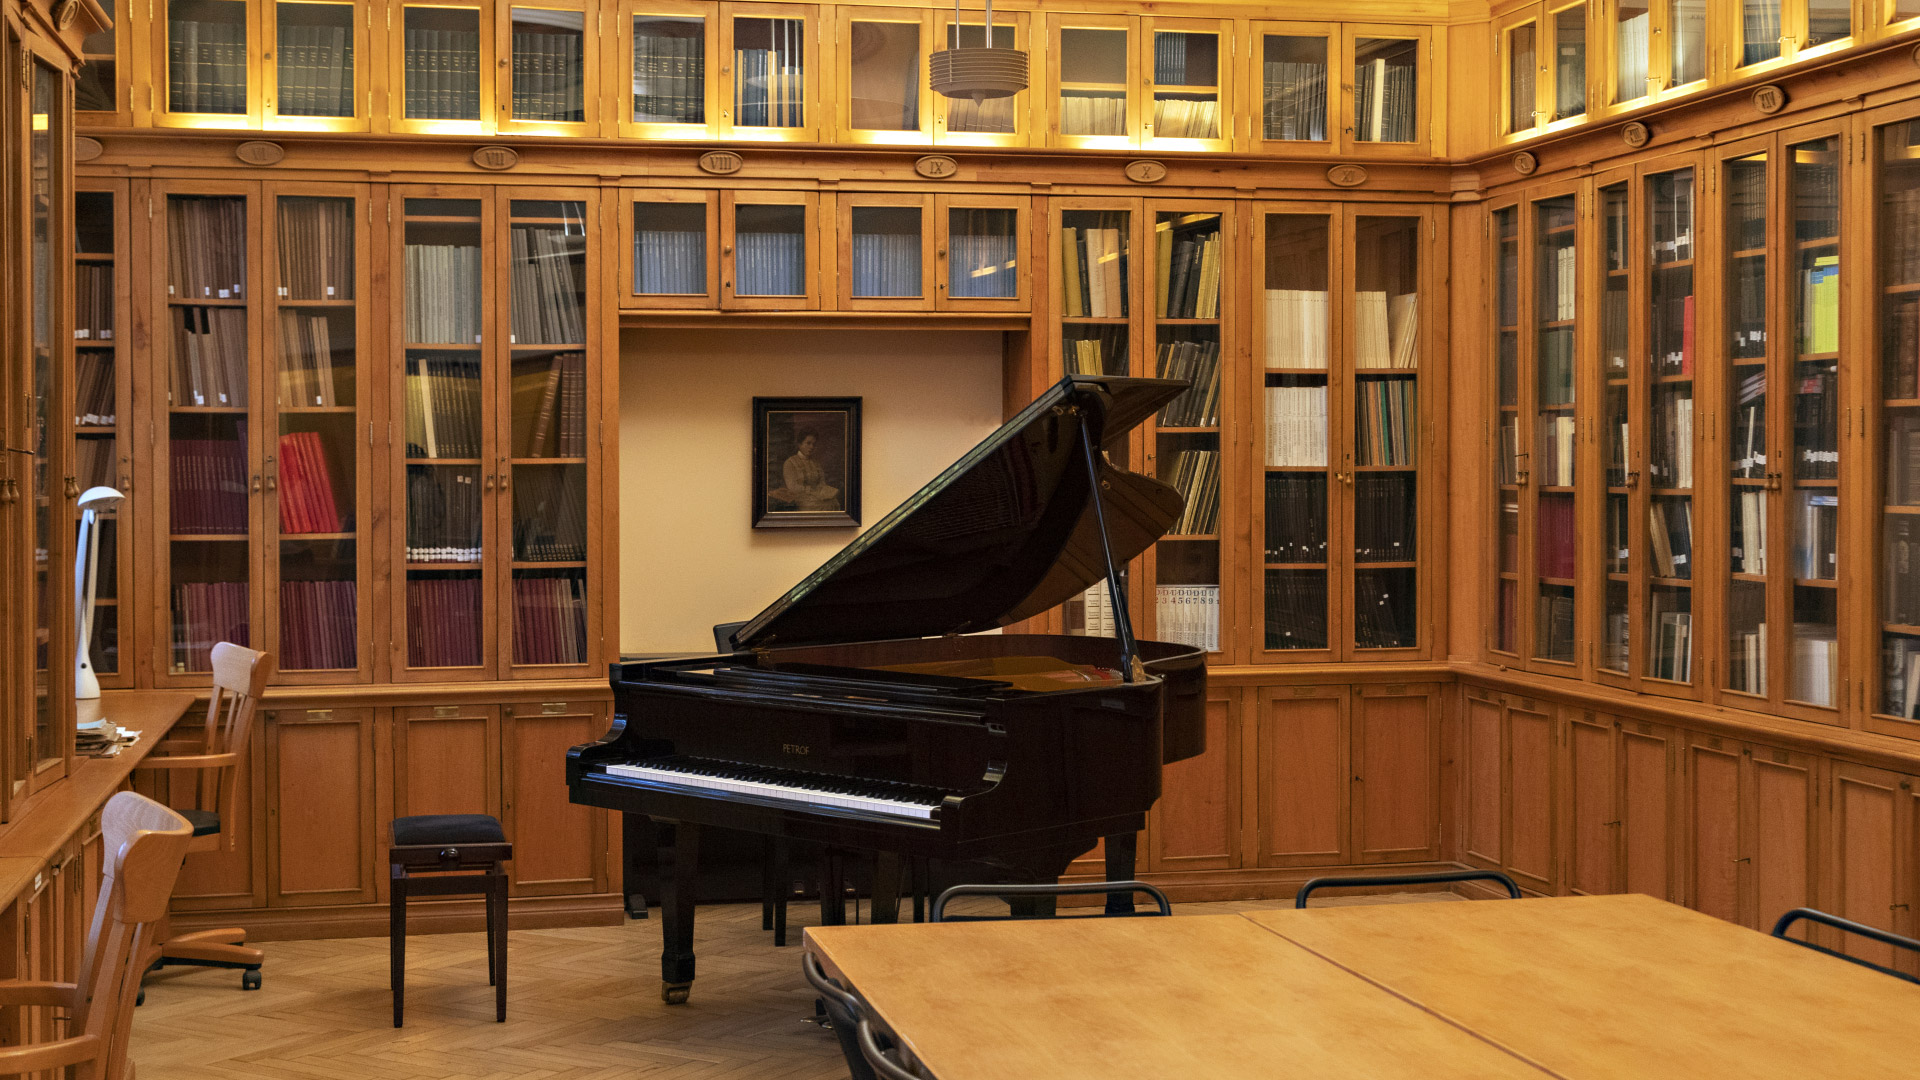 Musicological Library